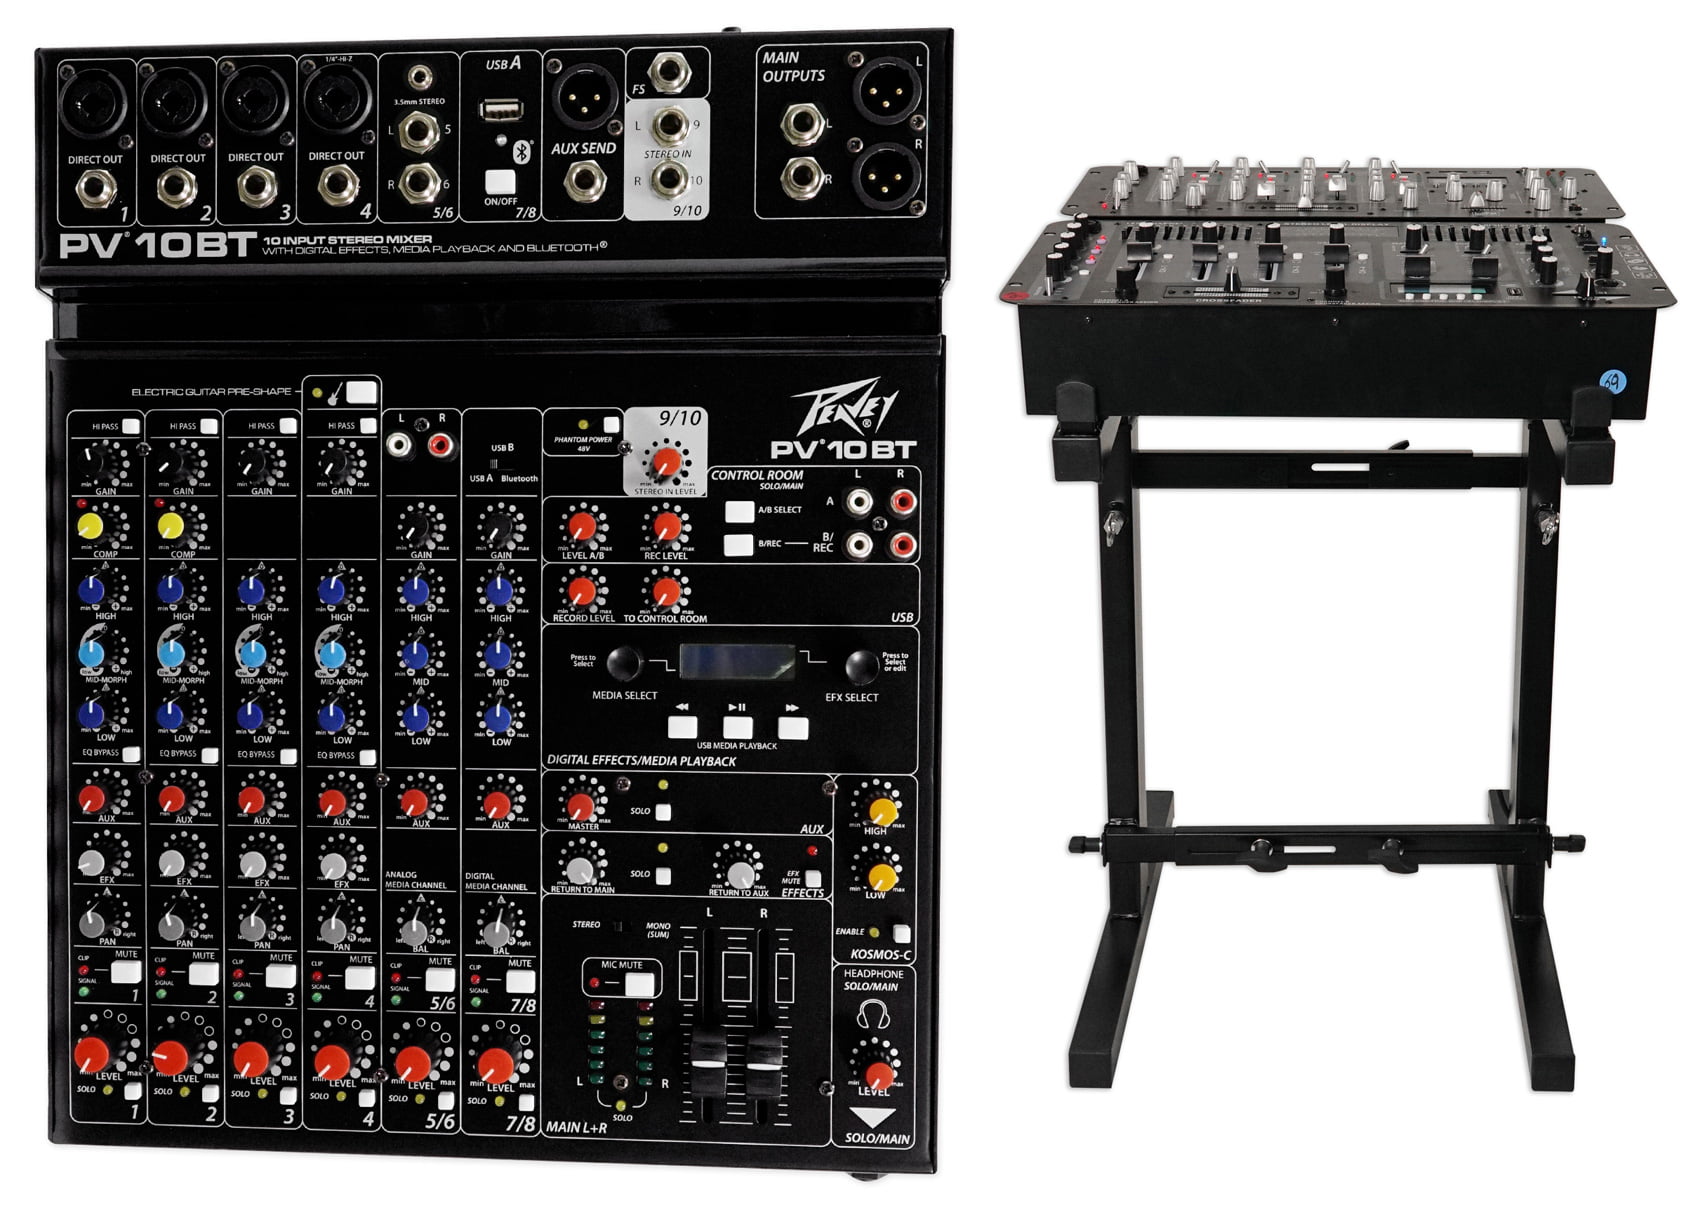 Peavey PV 20 XLR Female to Male Low Z Mic Cables Package: Peavey PV 10BT PV10BT Pro Audio Mixer With 4 Mic In Compressor/Effects and 3 Band EQ + USB 4 Bluetooth 